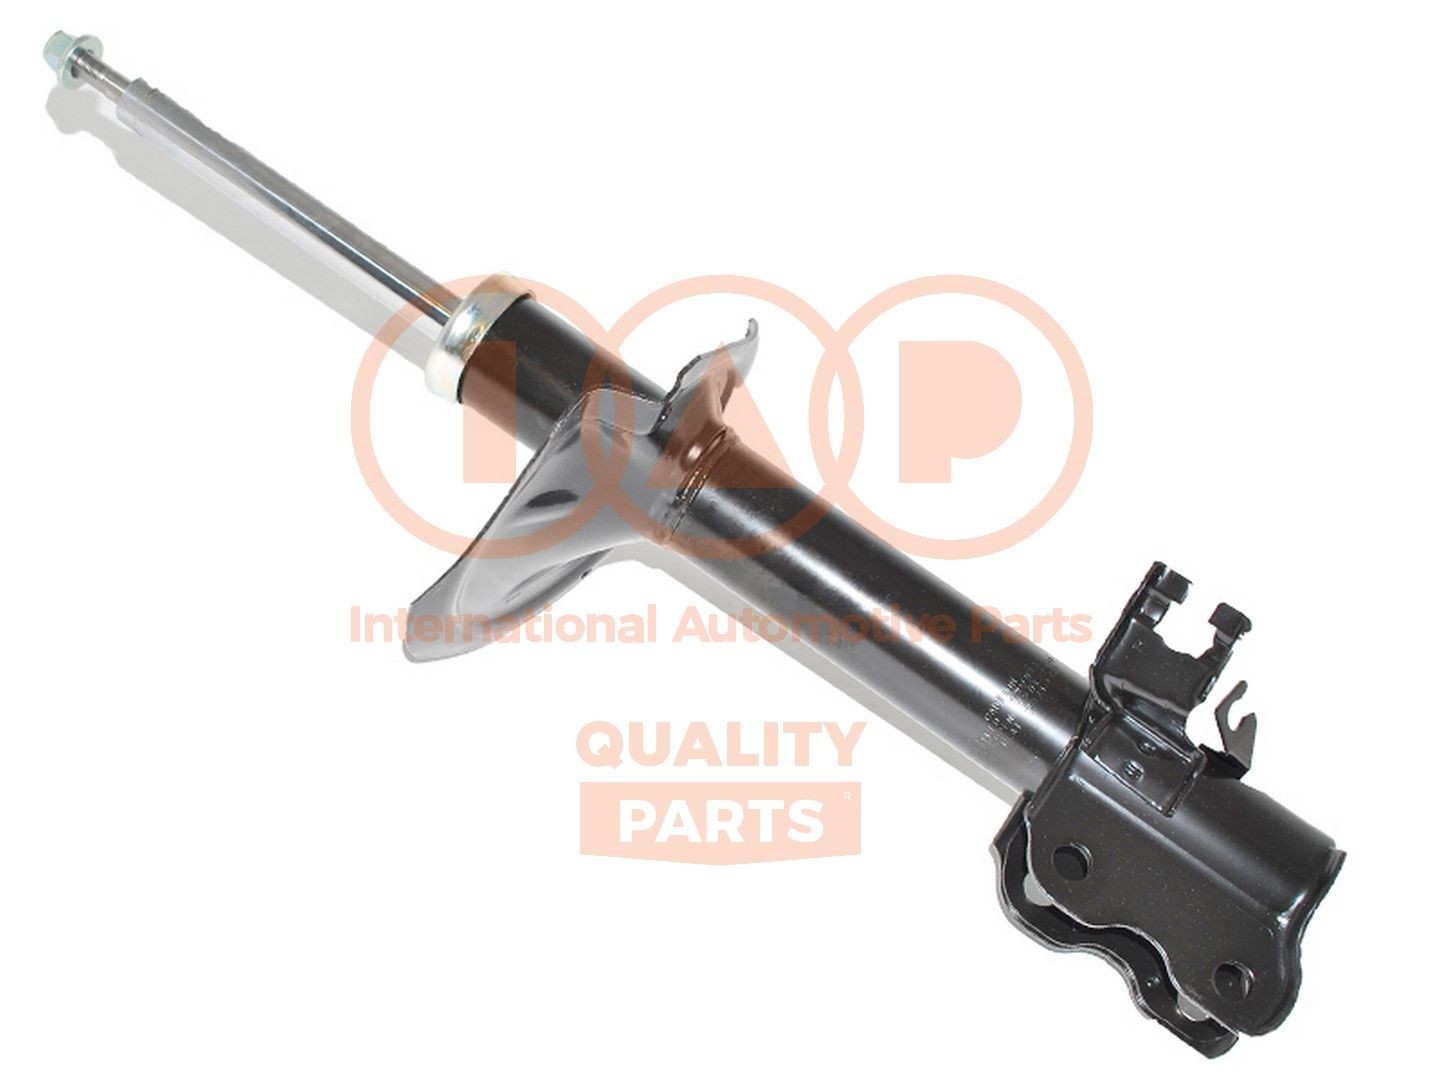 IAP QUALITY PARTS 504-13100 Shock absorber 543028H726